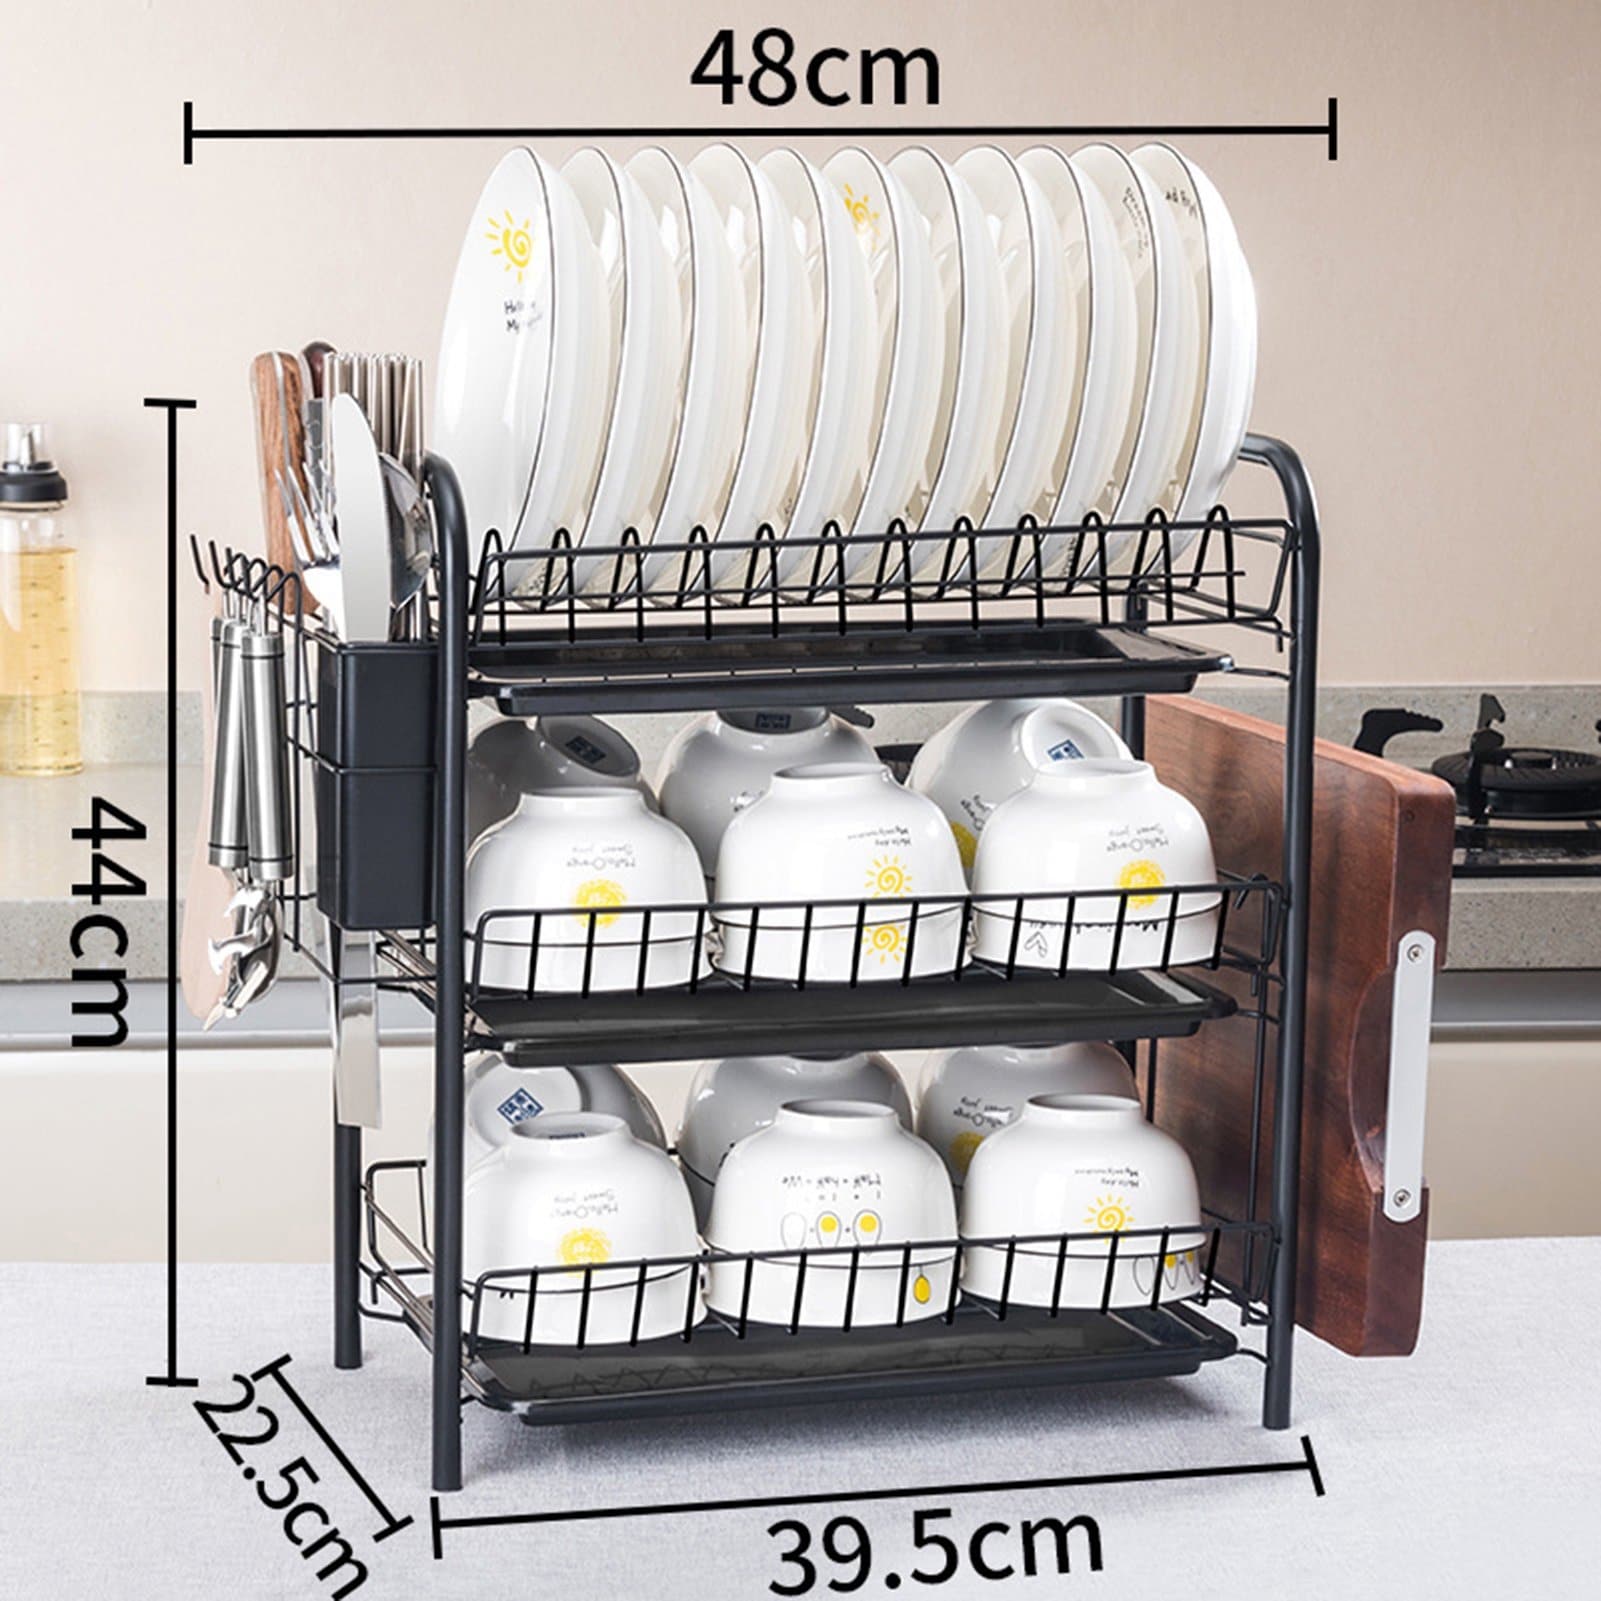 https://ak1.ostkcdn.com/images/products/is/images/direct/7dfc4d5ab330967e2d07e9c76b2359c7513c20ce/2-Tier-Large-Capacity-Dish-Rack-with-Tray%2C-Cutting-Board-Holder.jpg